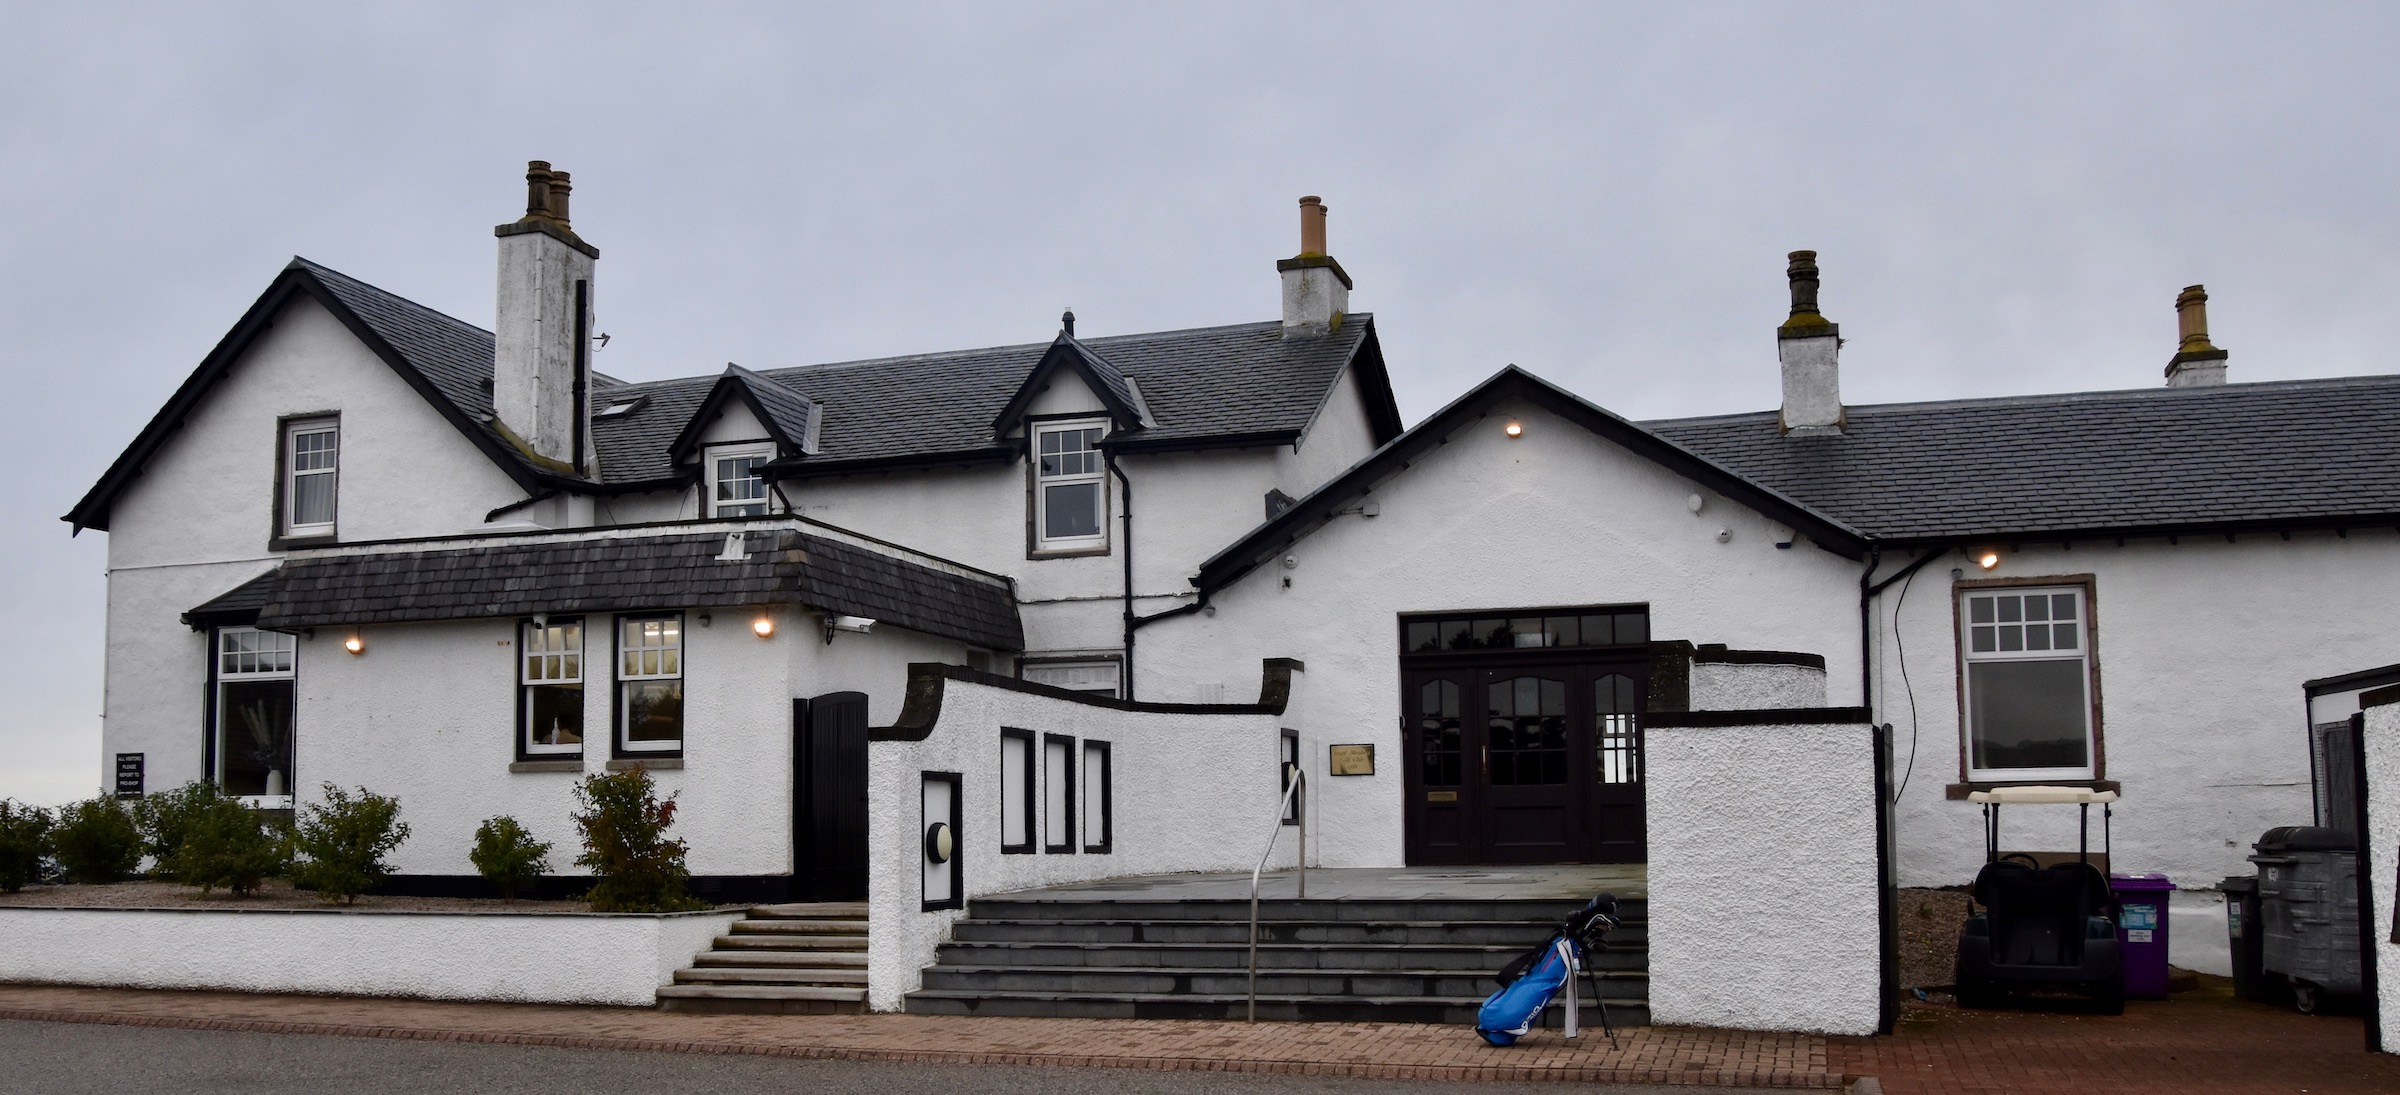 Royal Aberdeen Clubhouse